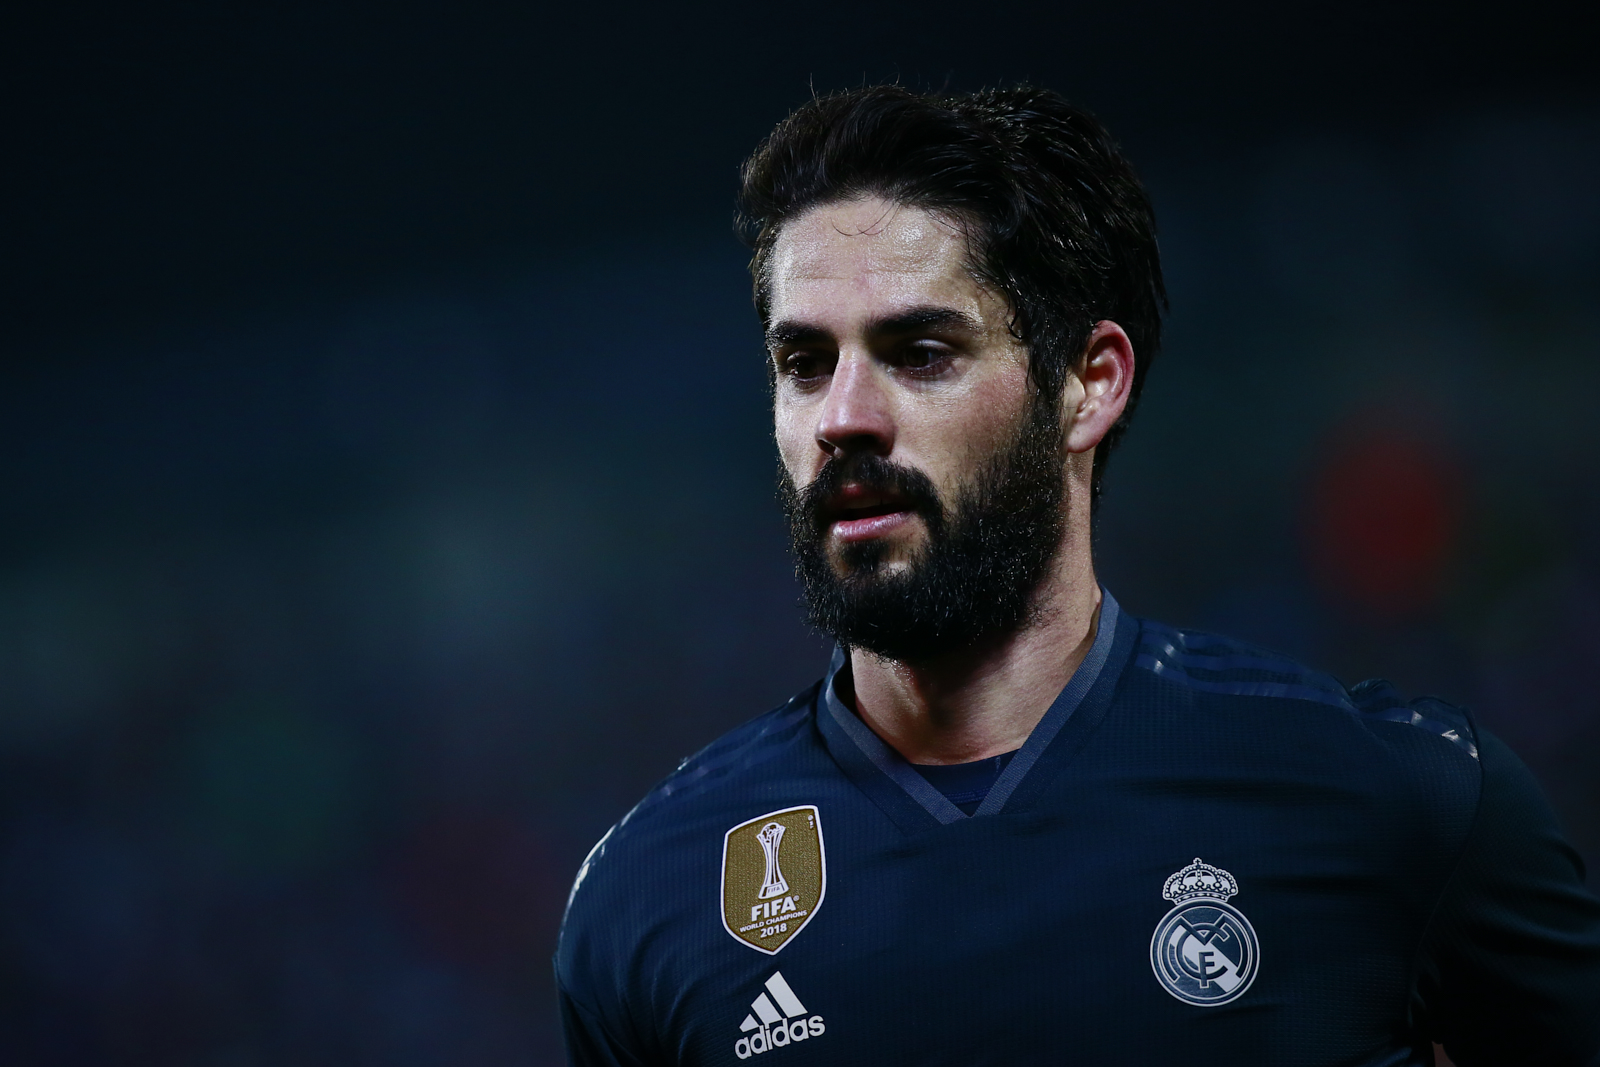 LEGANES, SPAIN - JANUARY 16: Isco of Real Madrid CF in action during the Copa del Rey Round of 16 second leg match between CD Leganes and Real Madrid at Estadio Municipal de Butarque on January 16, 2019 in Leganes, Spain. (Photo by Gonzalo Arroyo Moreno/Getty Images)